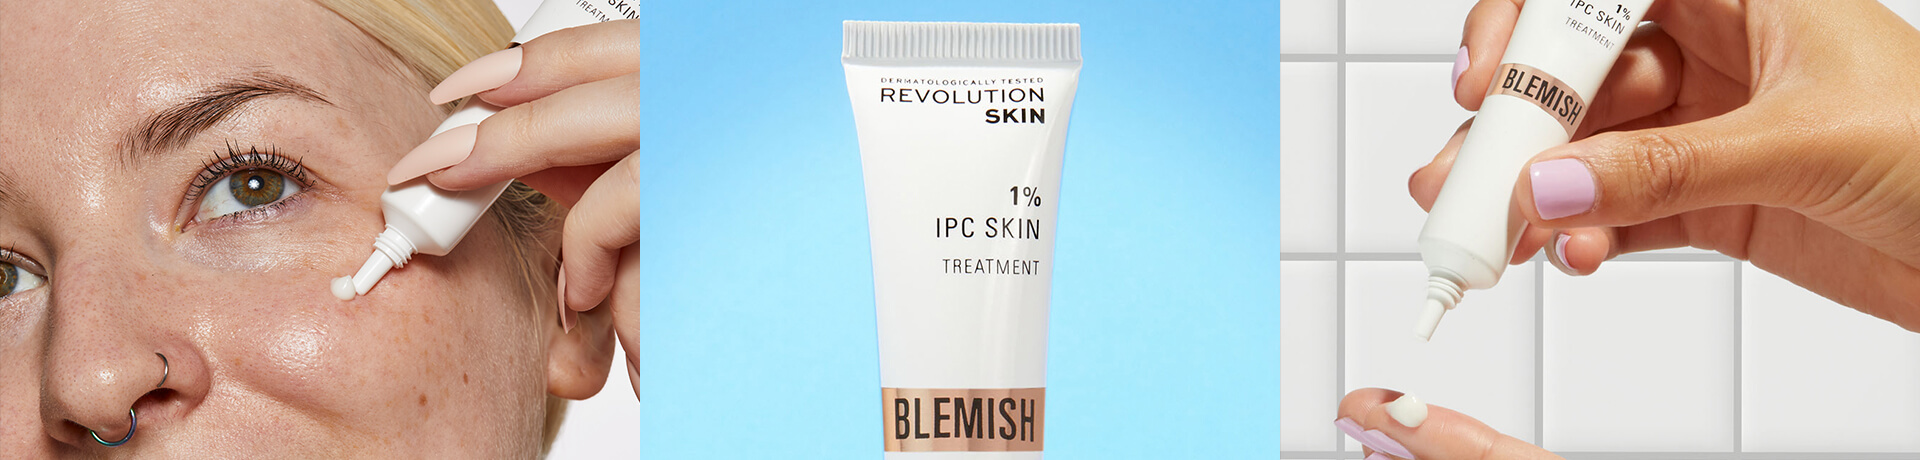 This Spot Treatment Gets Rid Of Breakouts and Heals The Skin